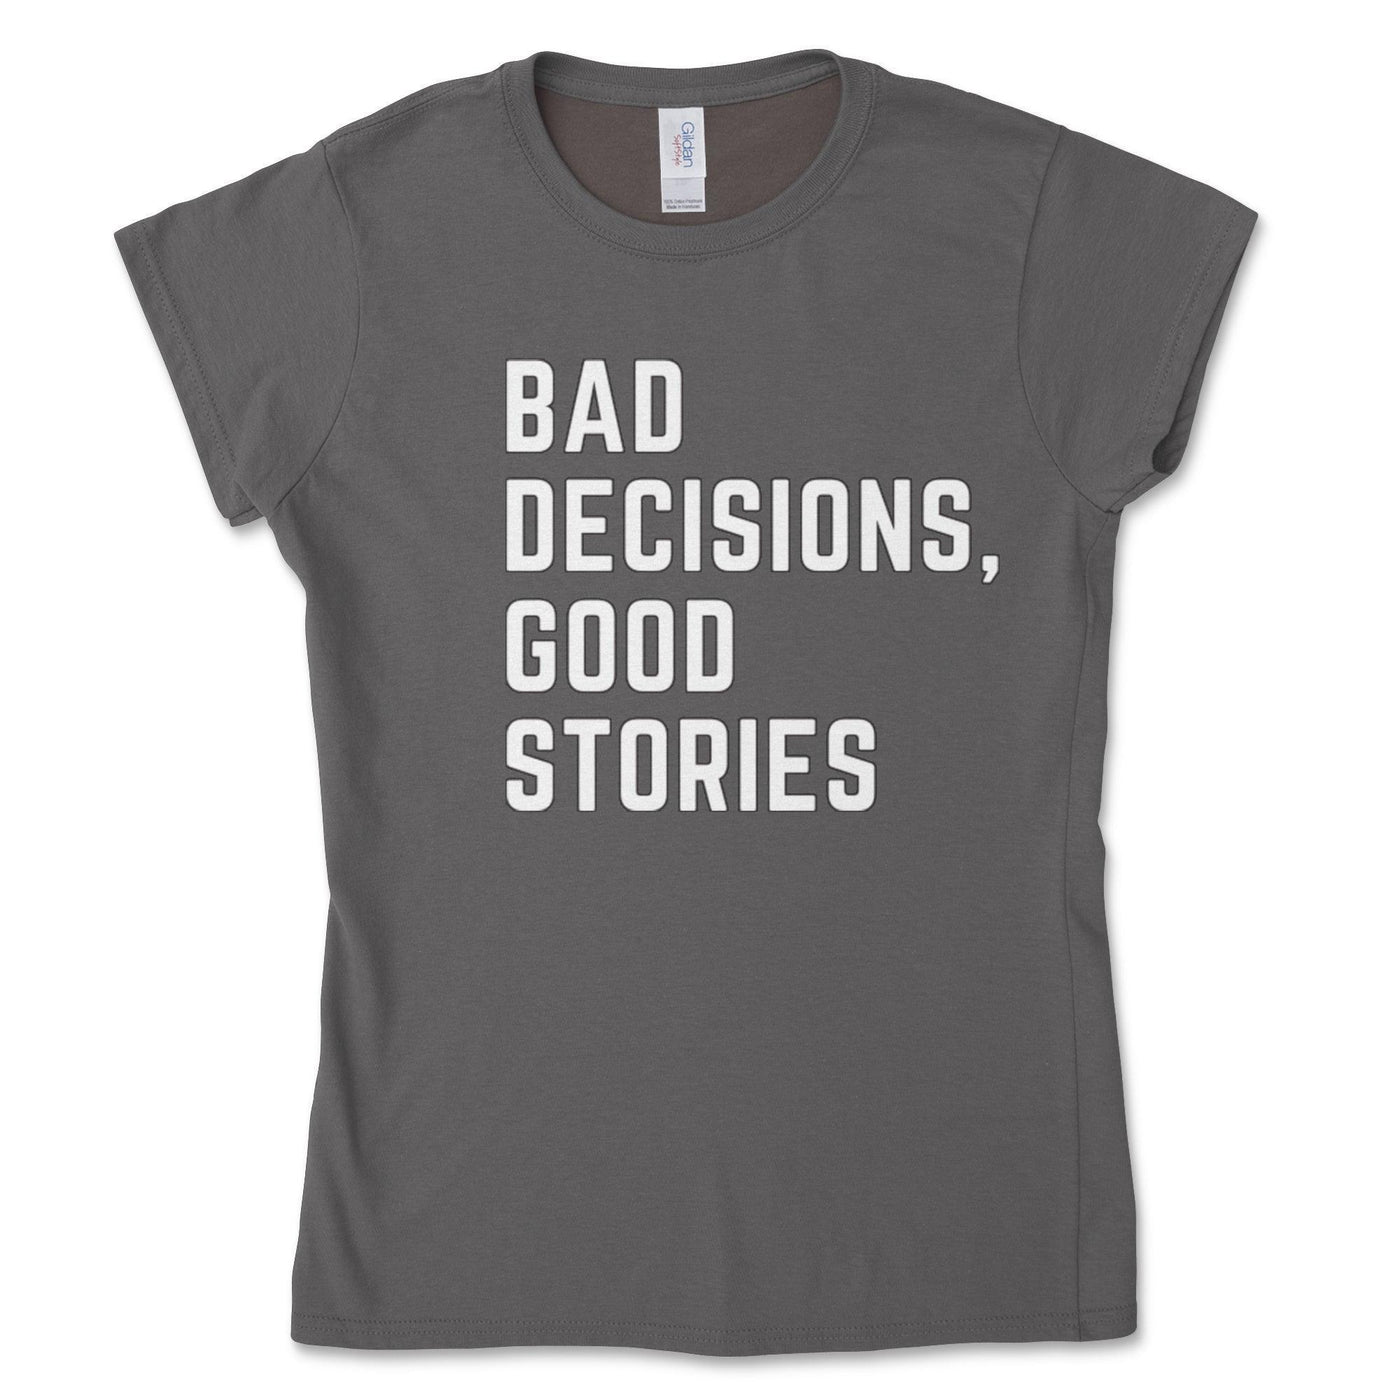 Bad Decisions Good Stories Women's Tee - Goats Trail